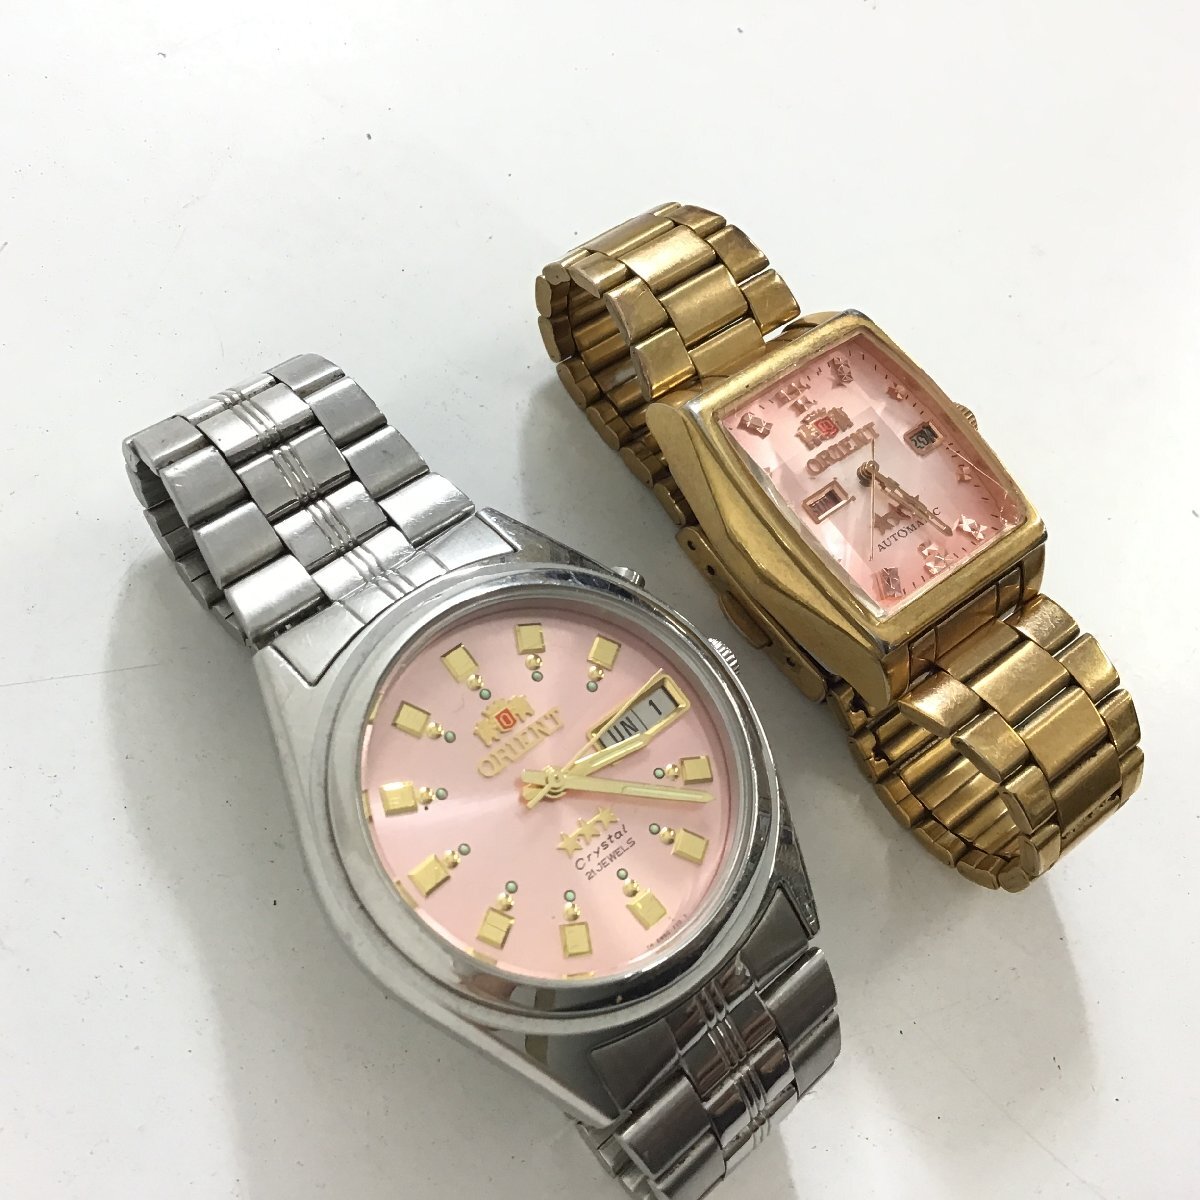 ORIENT Orient wristwatch 2 point set [ including in a package un- possible / selling out / common yama05-03]